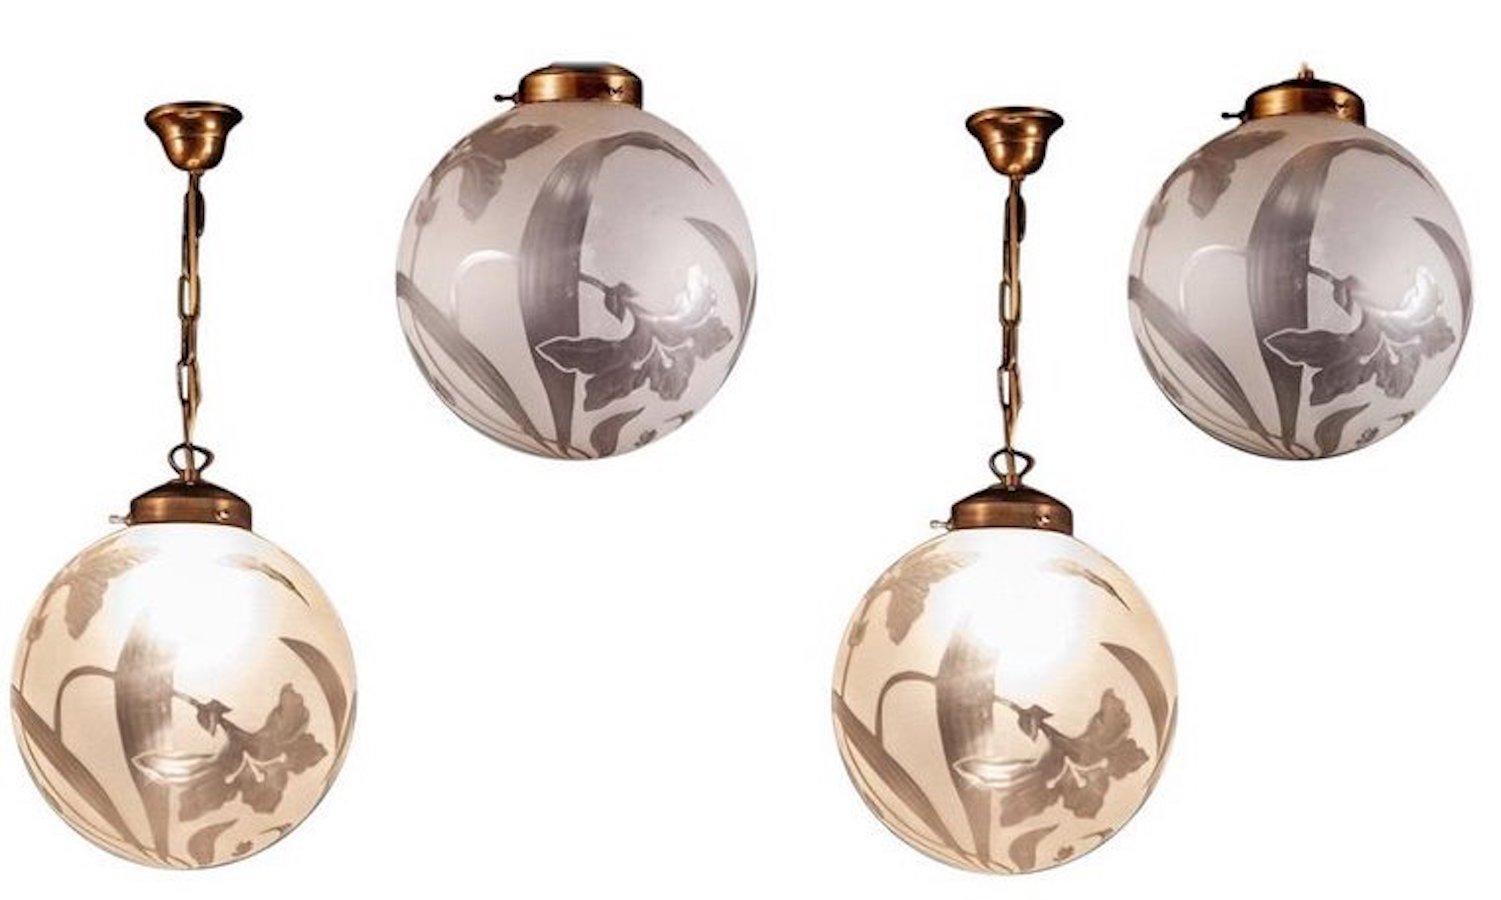 Four Liberty Engraved Glass Sphere Chandeliers or Lanterns, Italy, 1940 For Sale 3